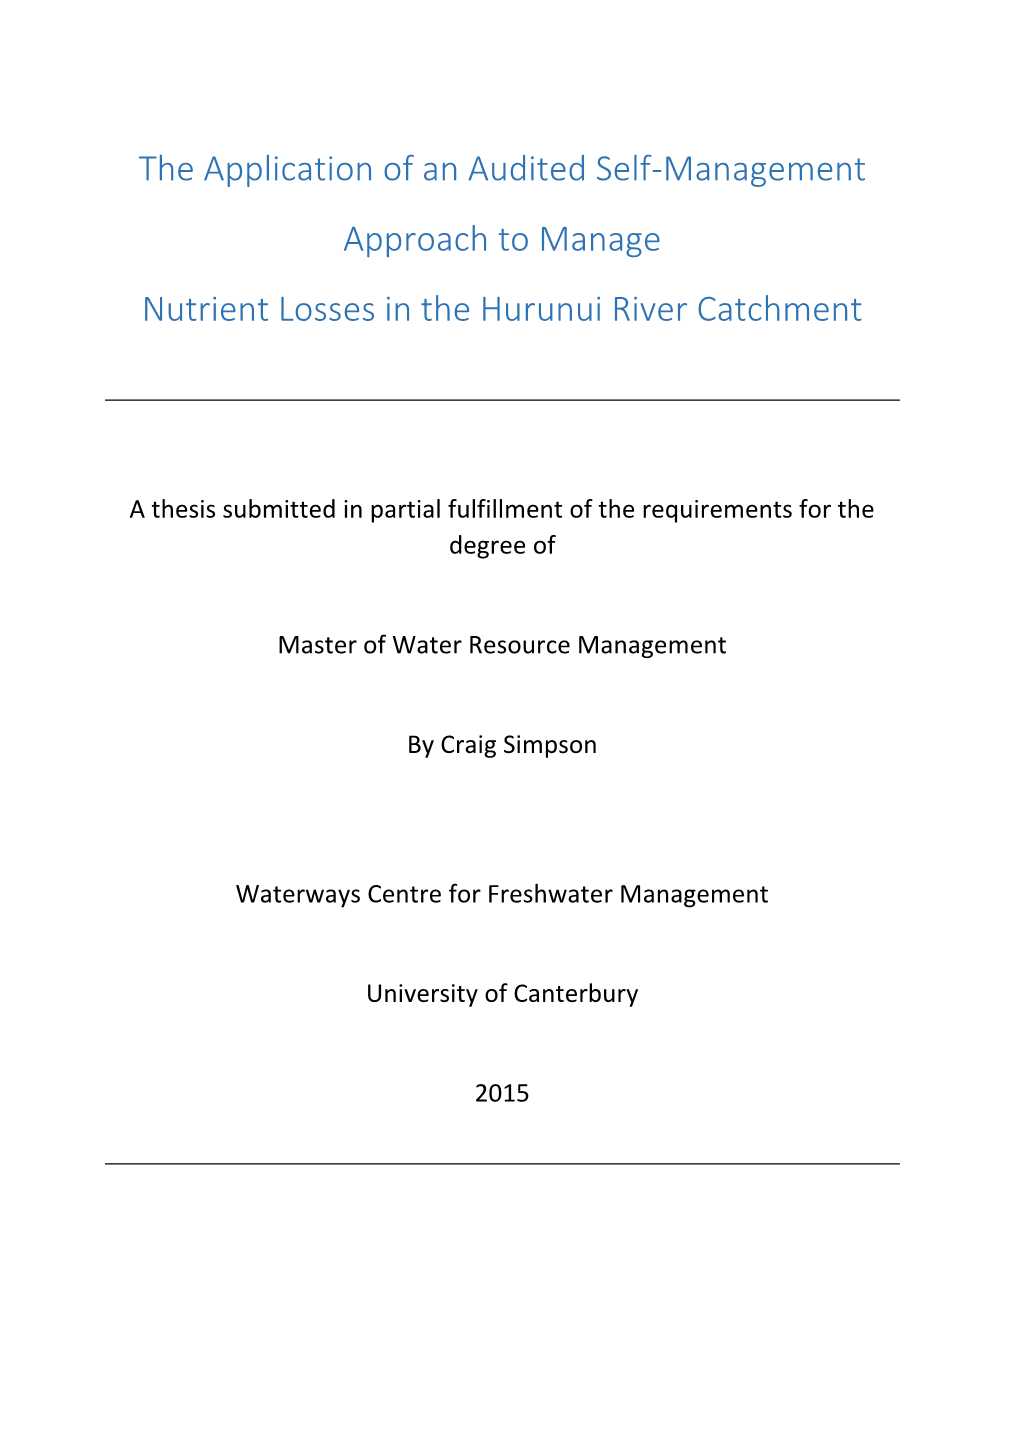 The Application of an Audited Self-Management Approach to Manage Nutrient Losses in the Hurunui River Catchment